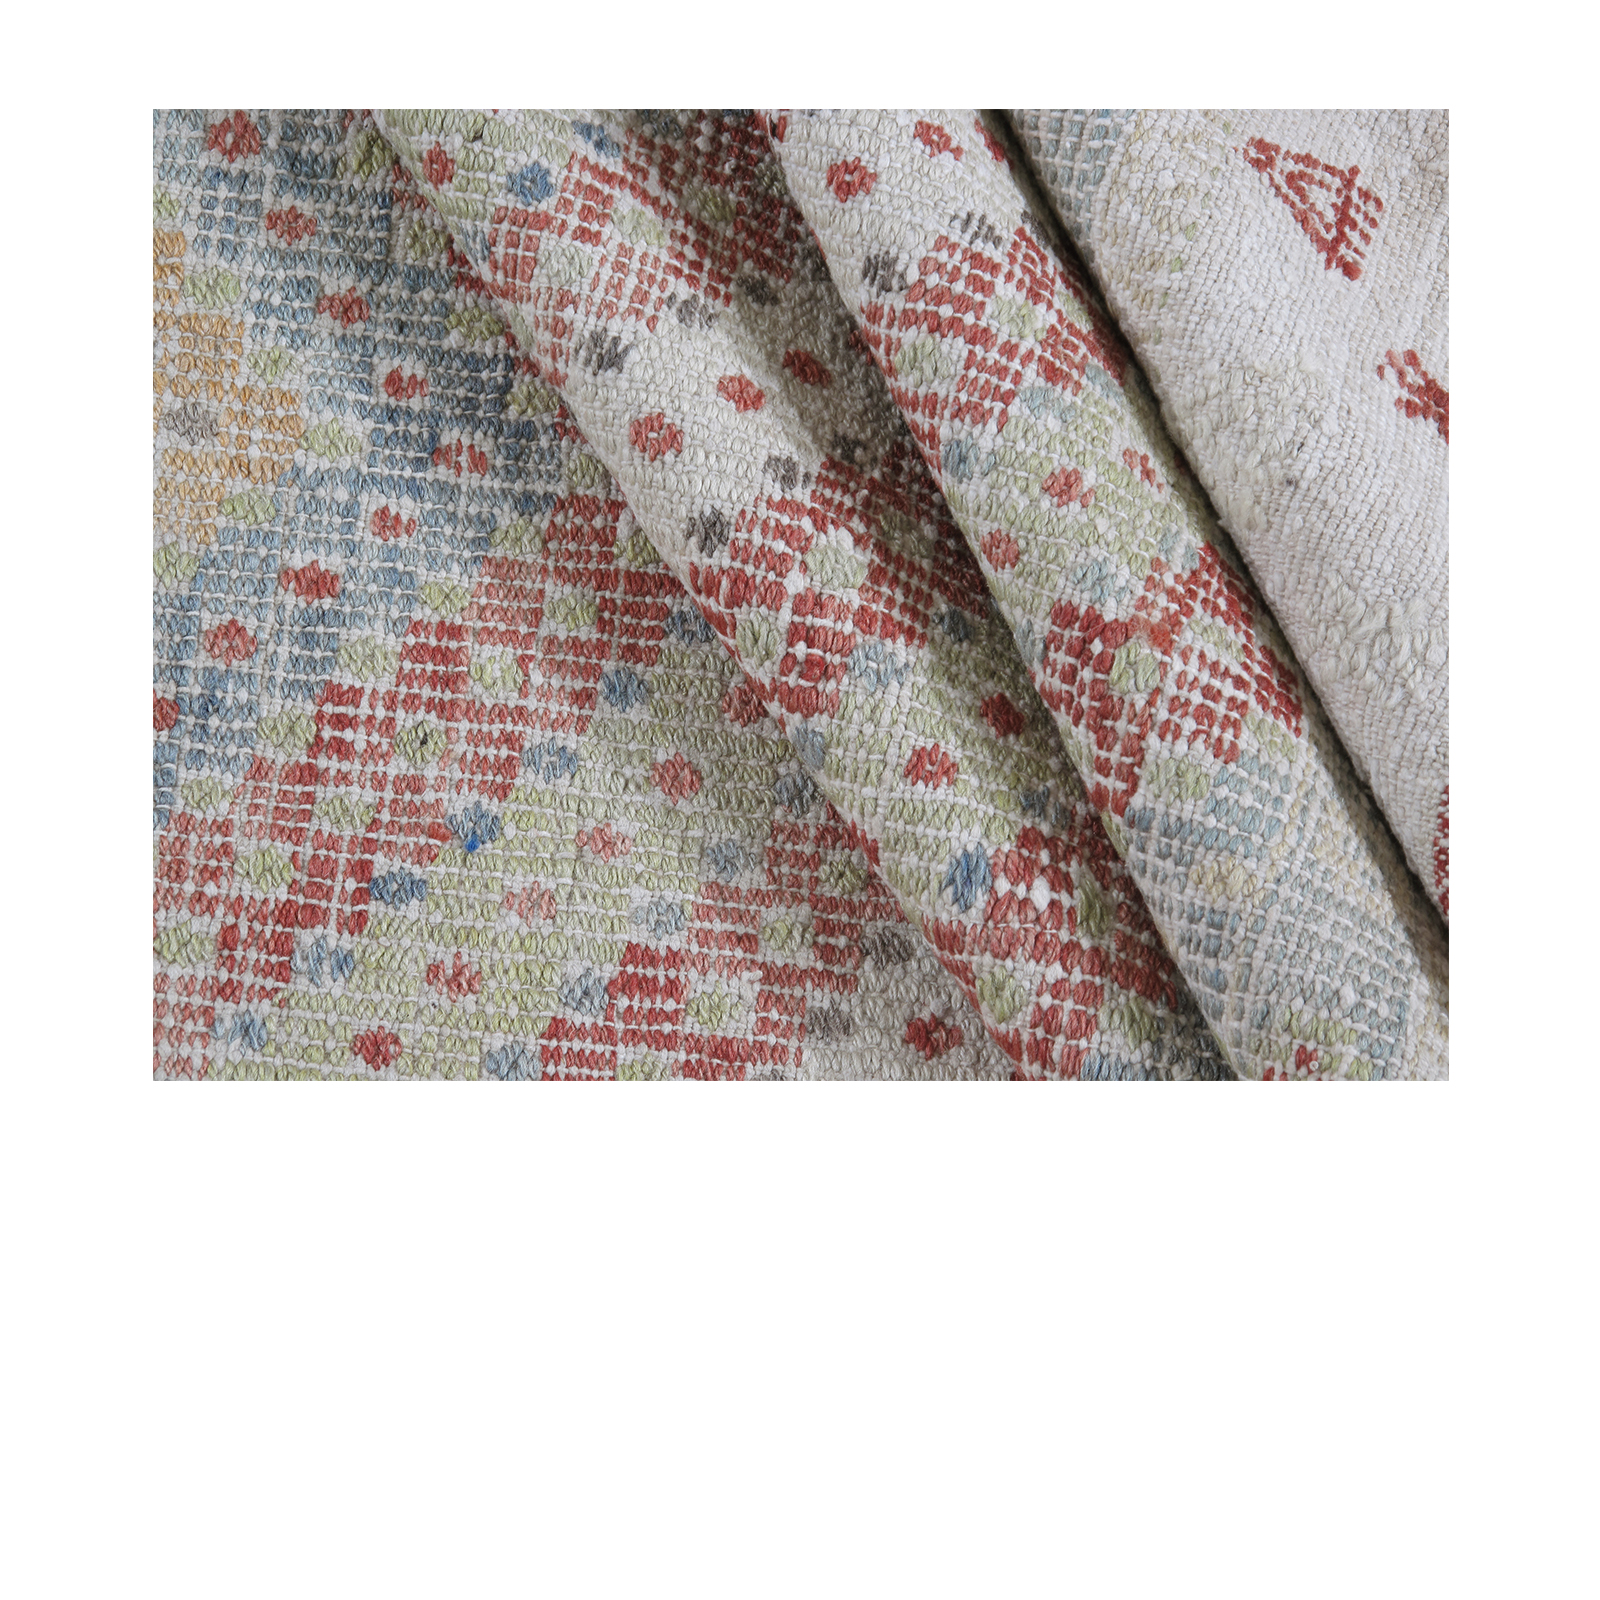 This Vintage flatweave is The collection reflects unmatched craftsmanship through revered traditional practices using all-natural organic dyes and materials.